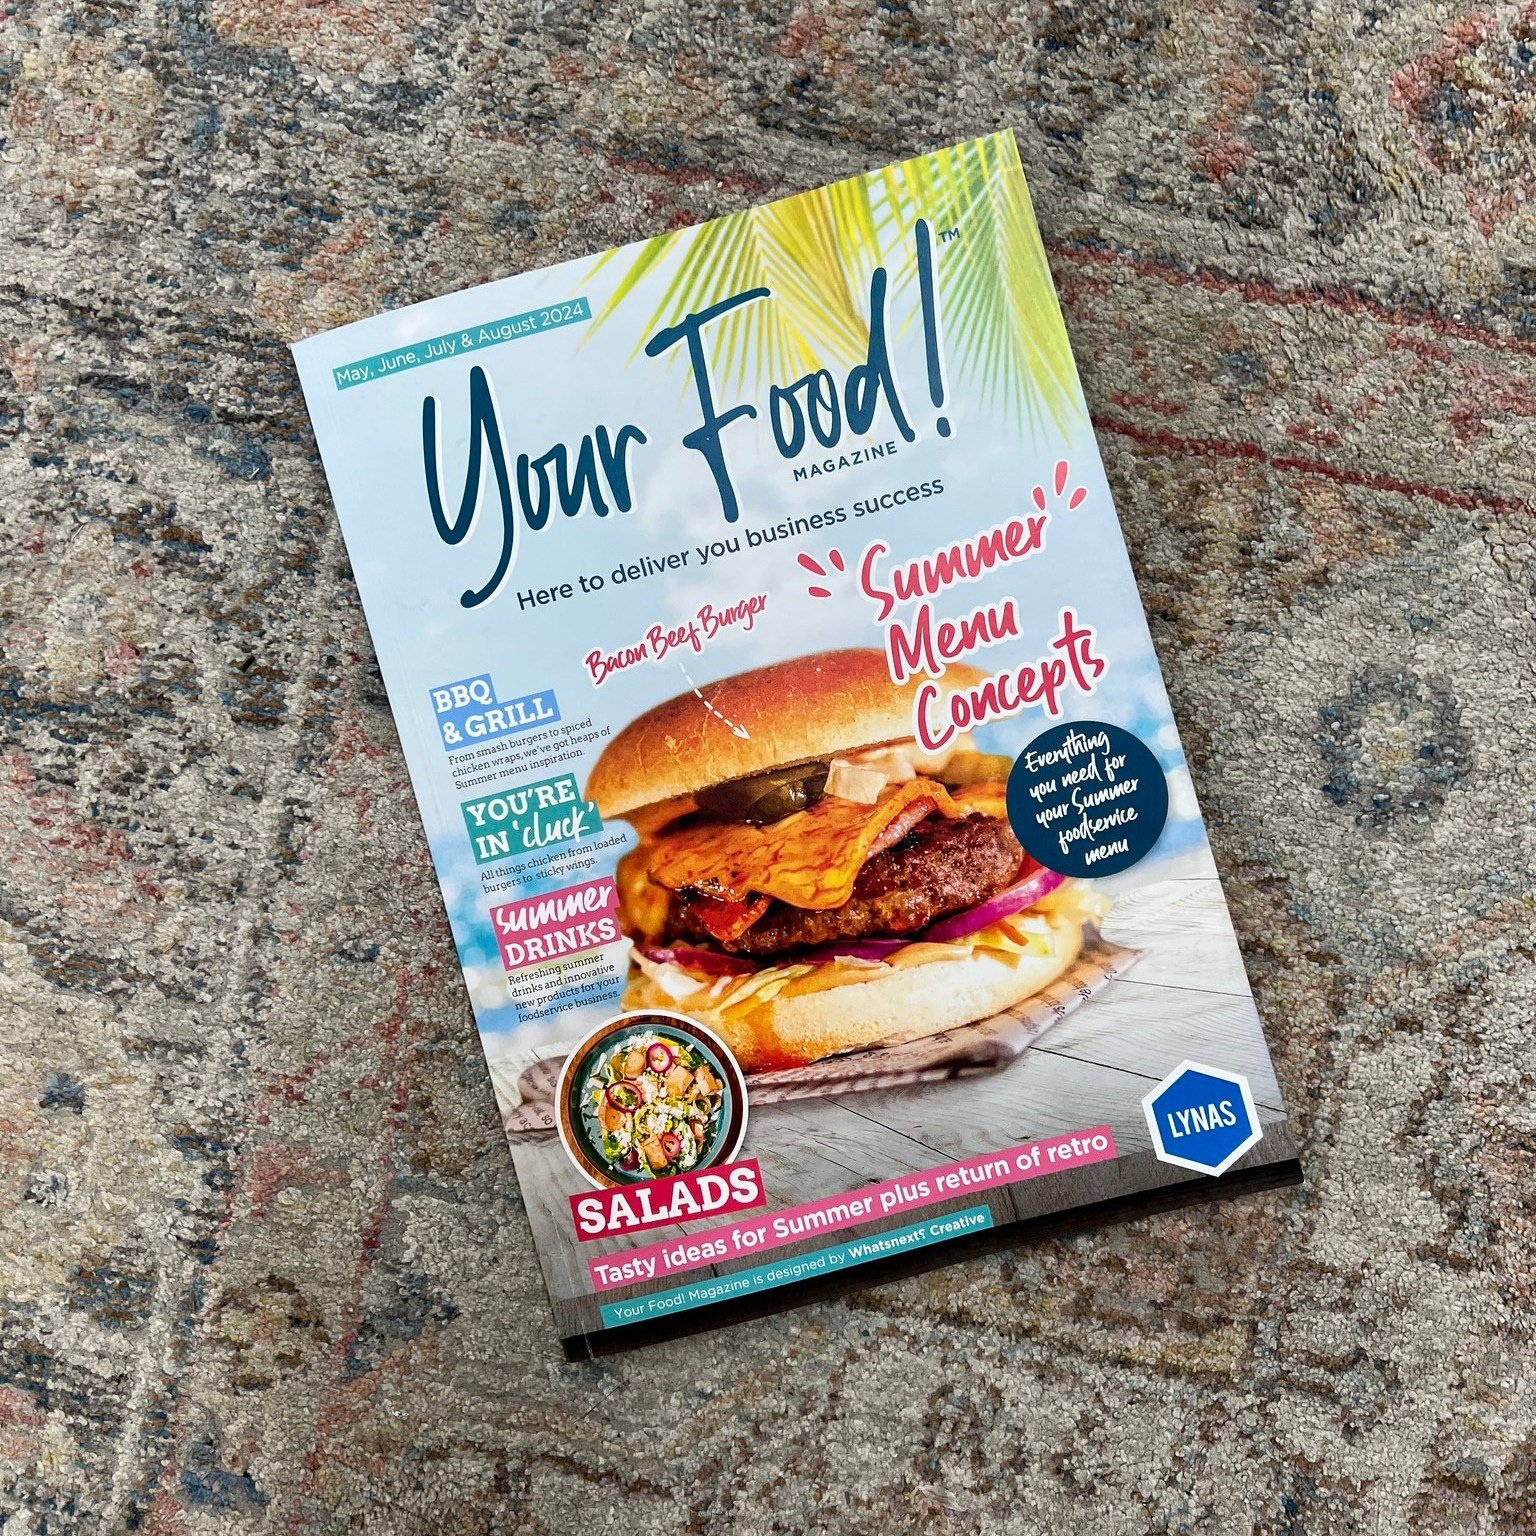 The Summer edition of Your Food Summer has landed at Lynas Foodservice, we really enjoyed working on this one

Here's a little peek of what's inside. Visit this link to view the full magazine 👉 lynasfoodservice.com/your-food-magazine/summer

Let's w